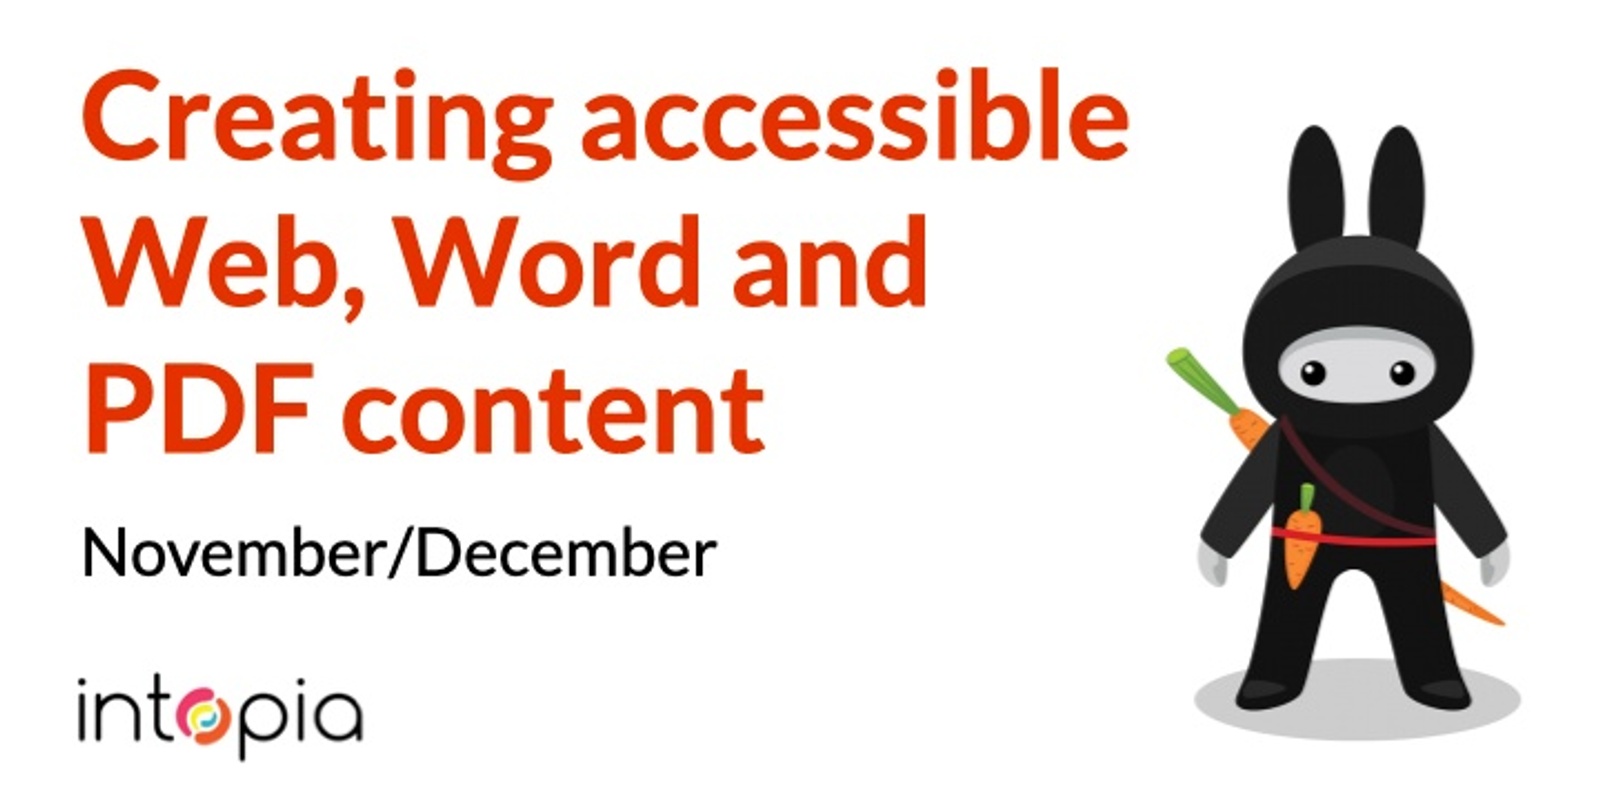 Banner image for Creating accessible Web, Word and PDF content - November/December